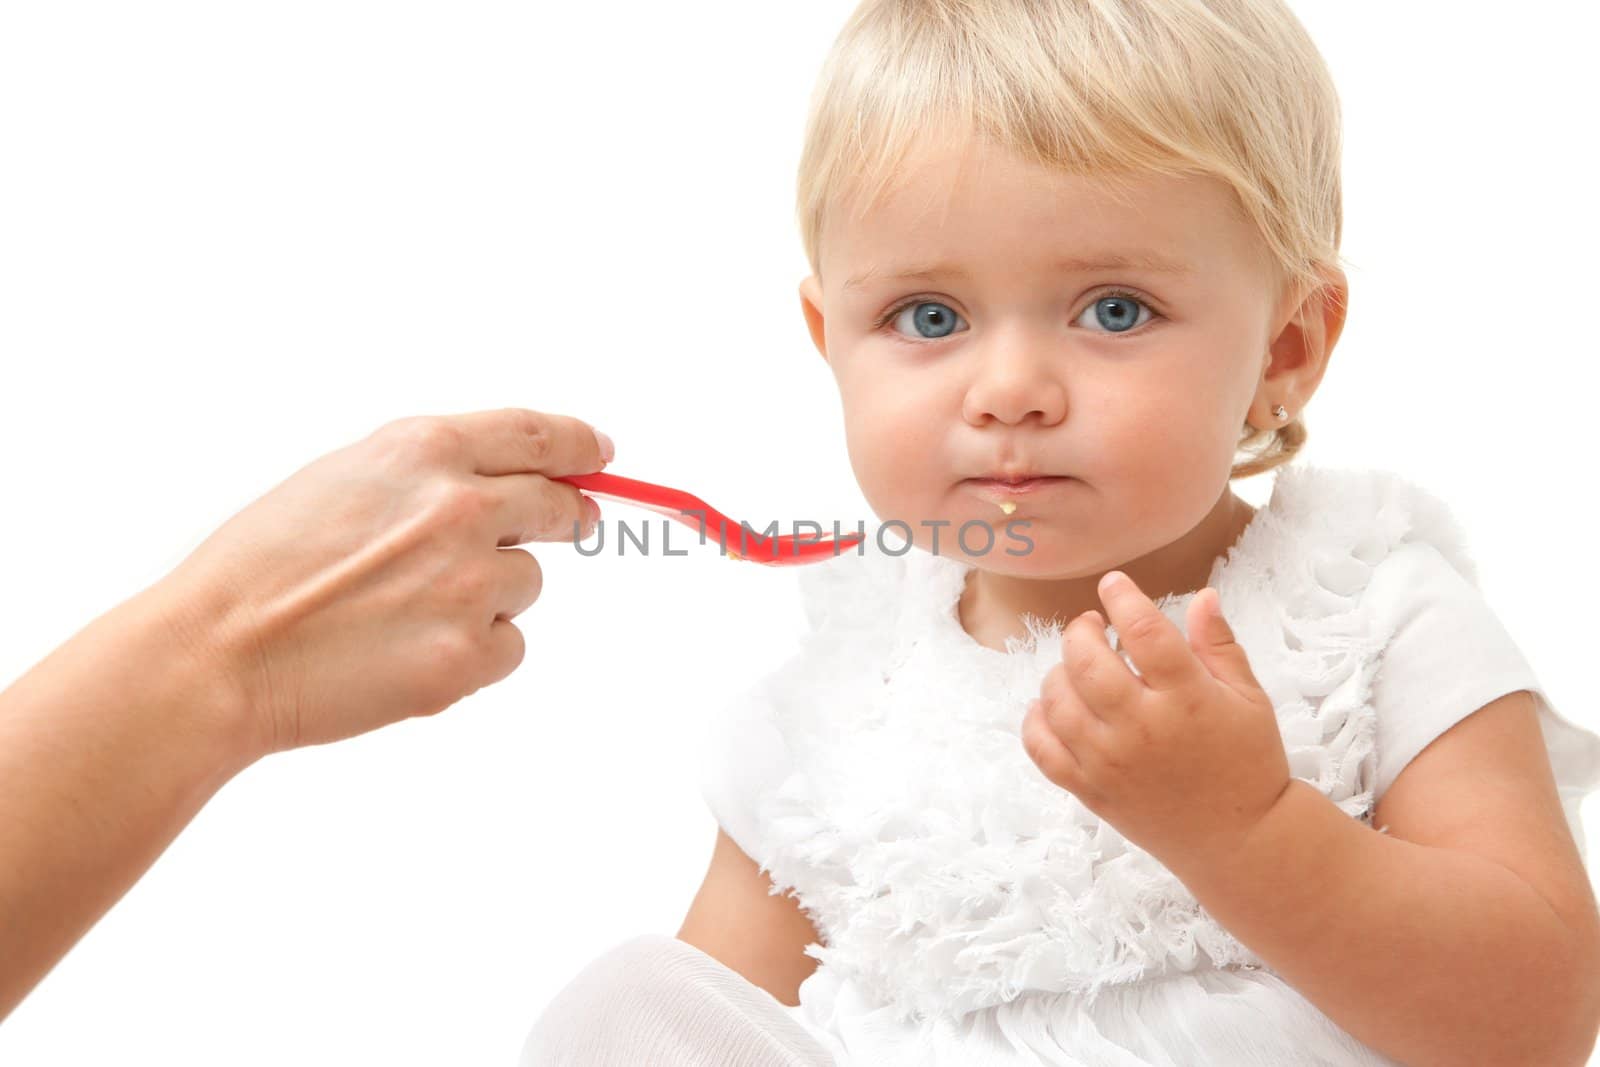 Portrait of blue eye baby girl being fed by hand with red spoon.Isolated on white background.